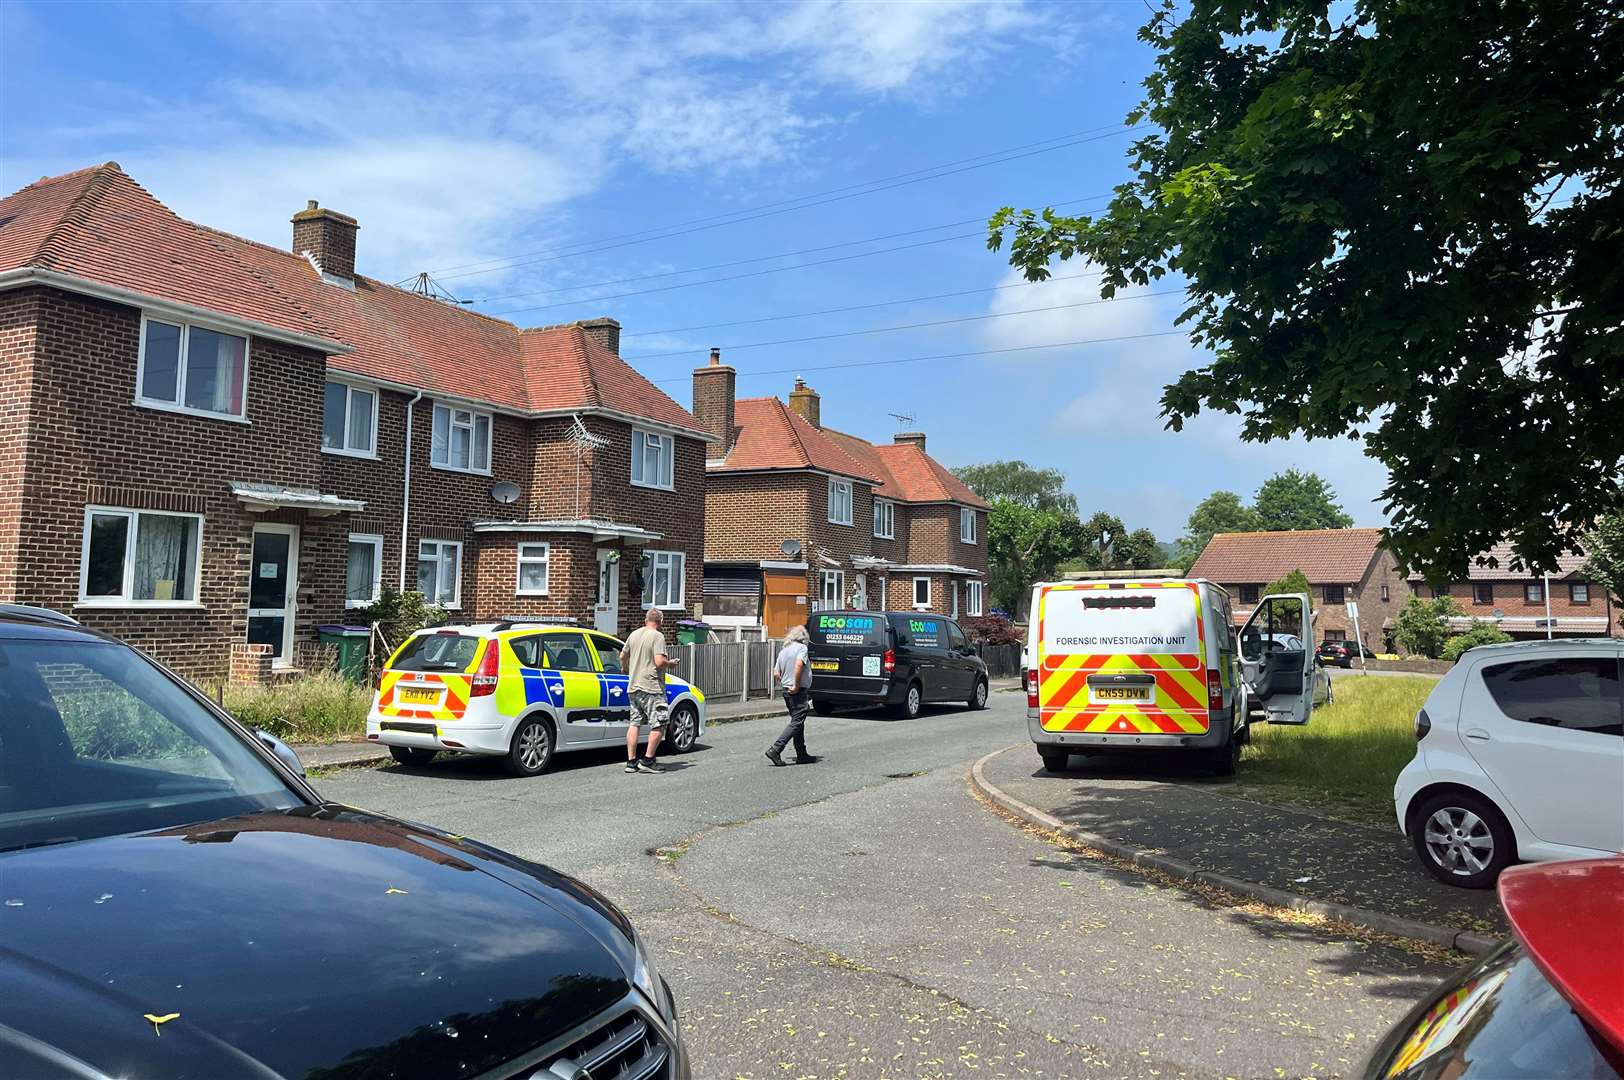 Police car and forensics van in Church Road in Cheriton, Folkestone, on Monday which are believed to be part of filming for a TV show